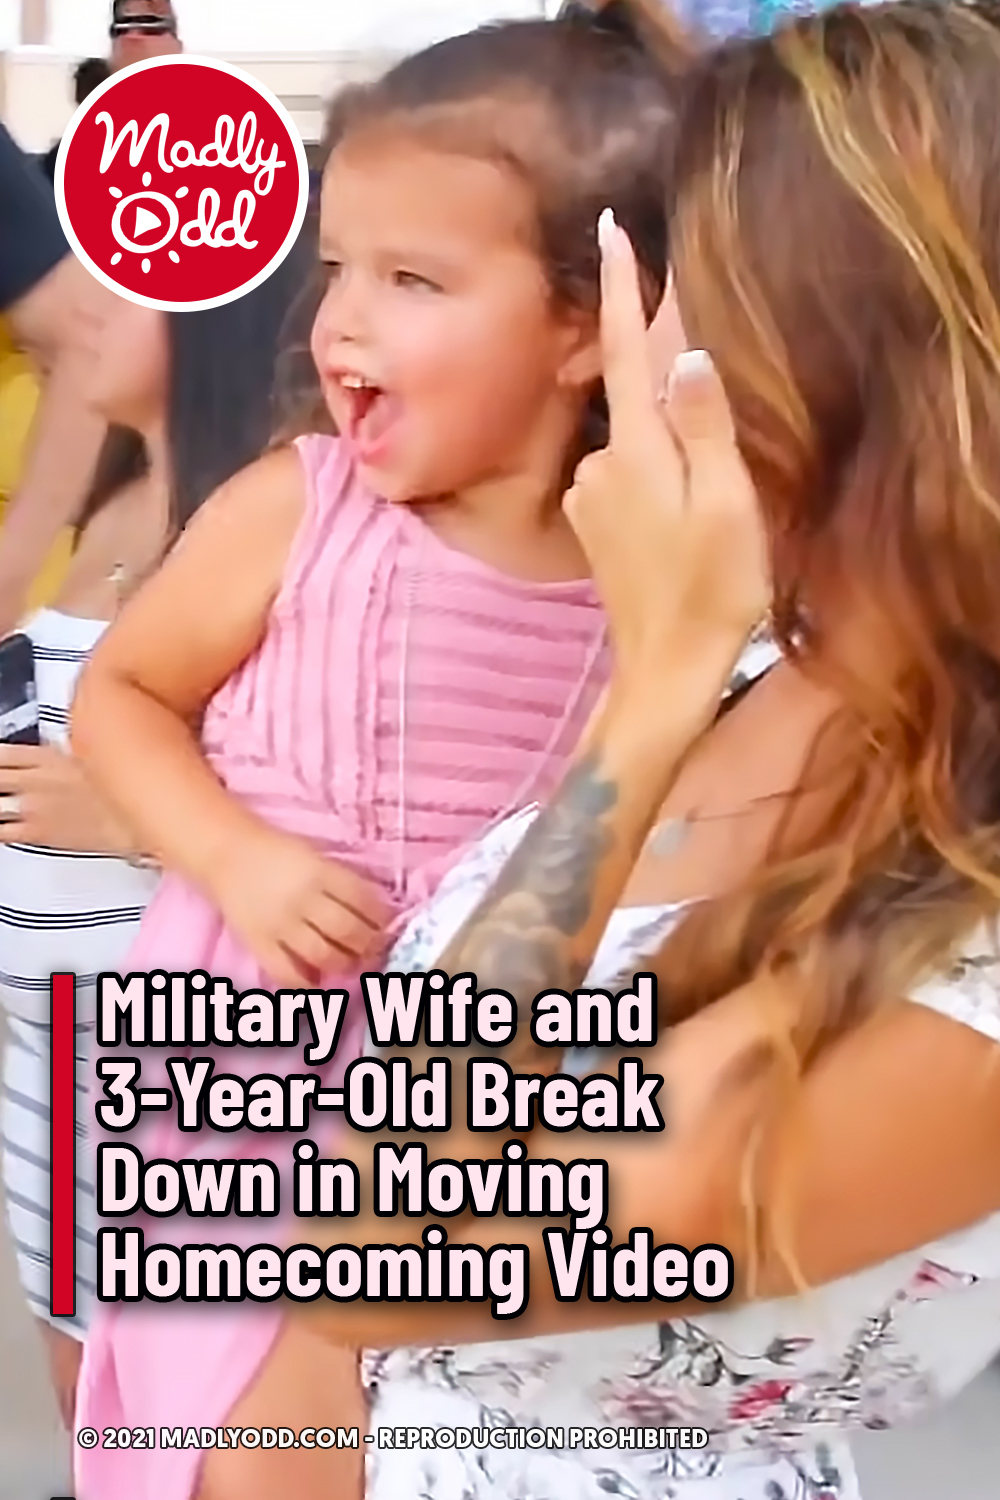 Military Wife and 3-Year-Old Break Down in Moving Homecoming Video